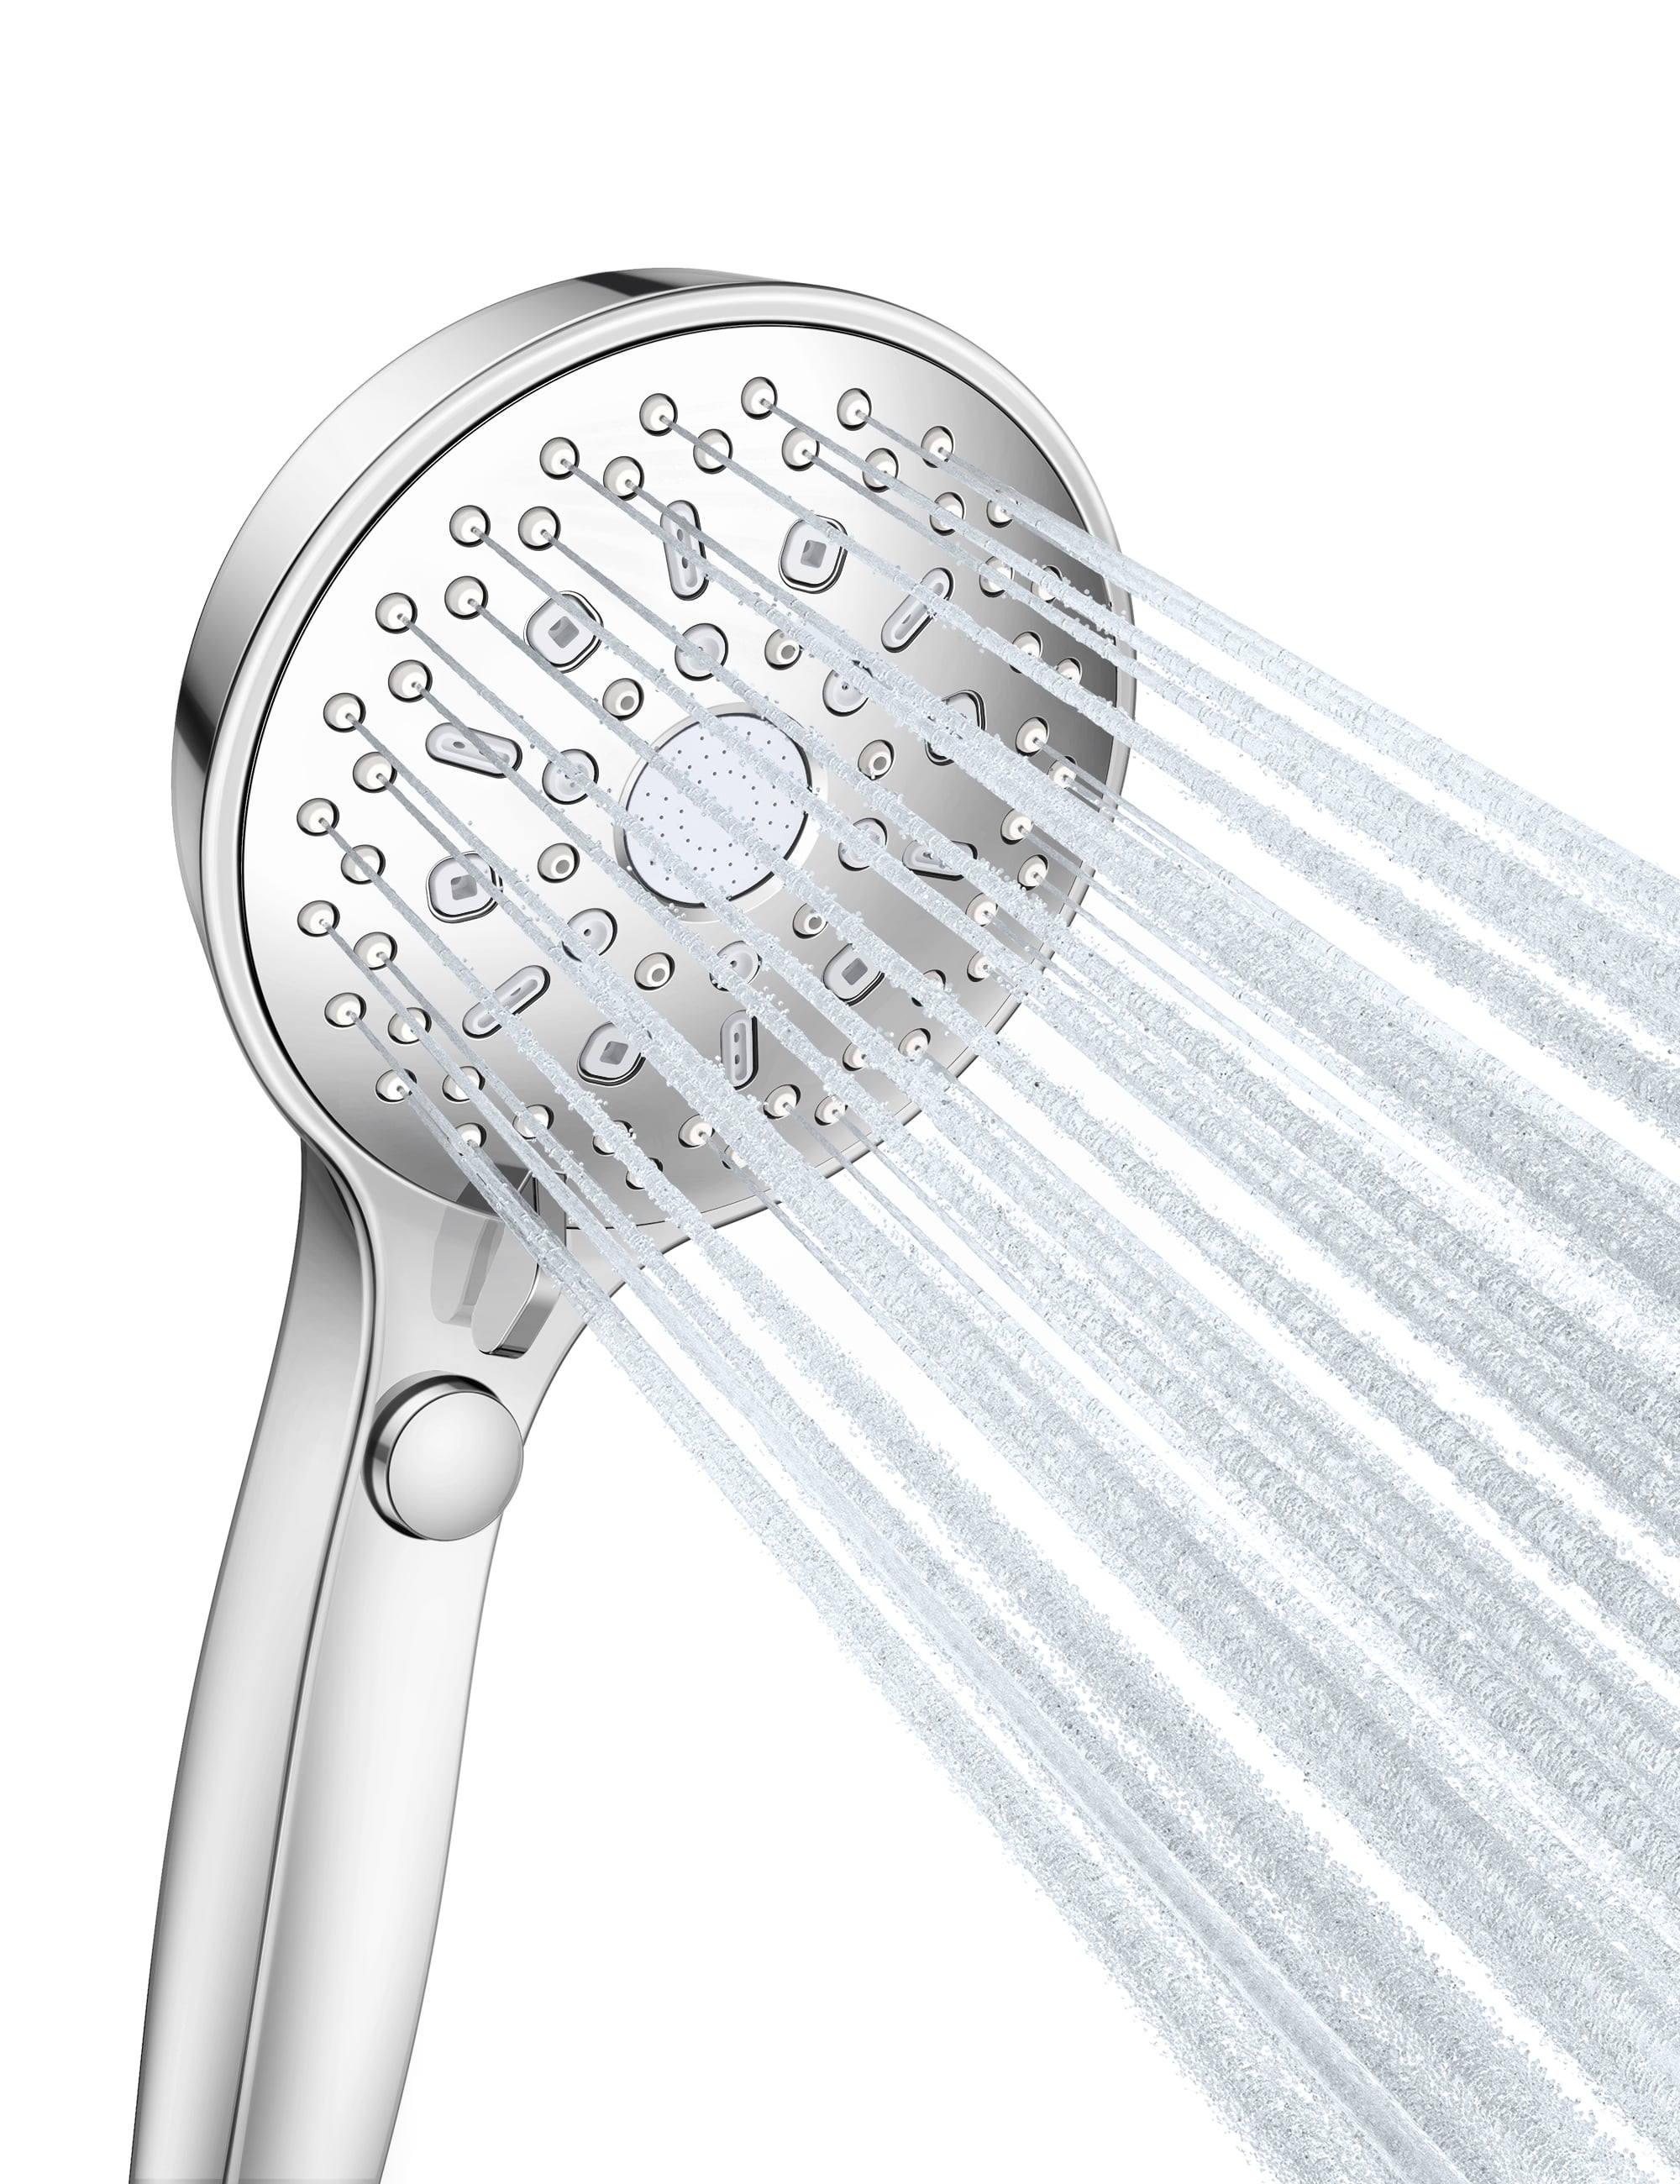 VXV Bathroom Handheld Shower Head with on off Switch 6 Spray Setting Removable Hand Held Showerheads with 6 FT Stainless steel Hose and Adjustable Angle Bracket Matte Black